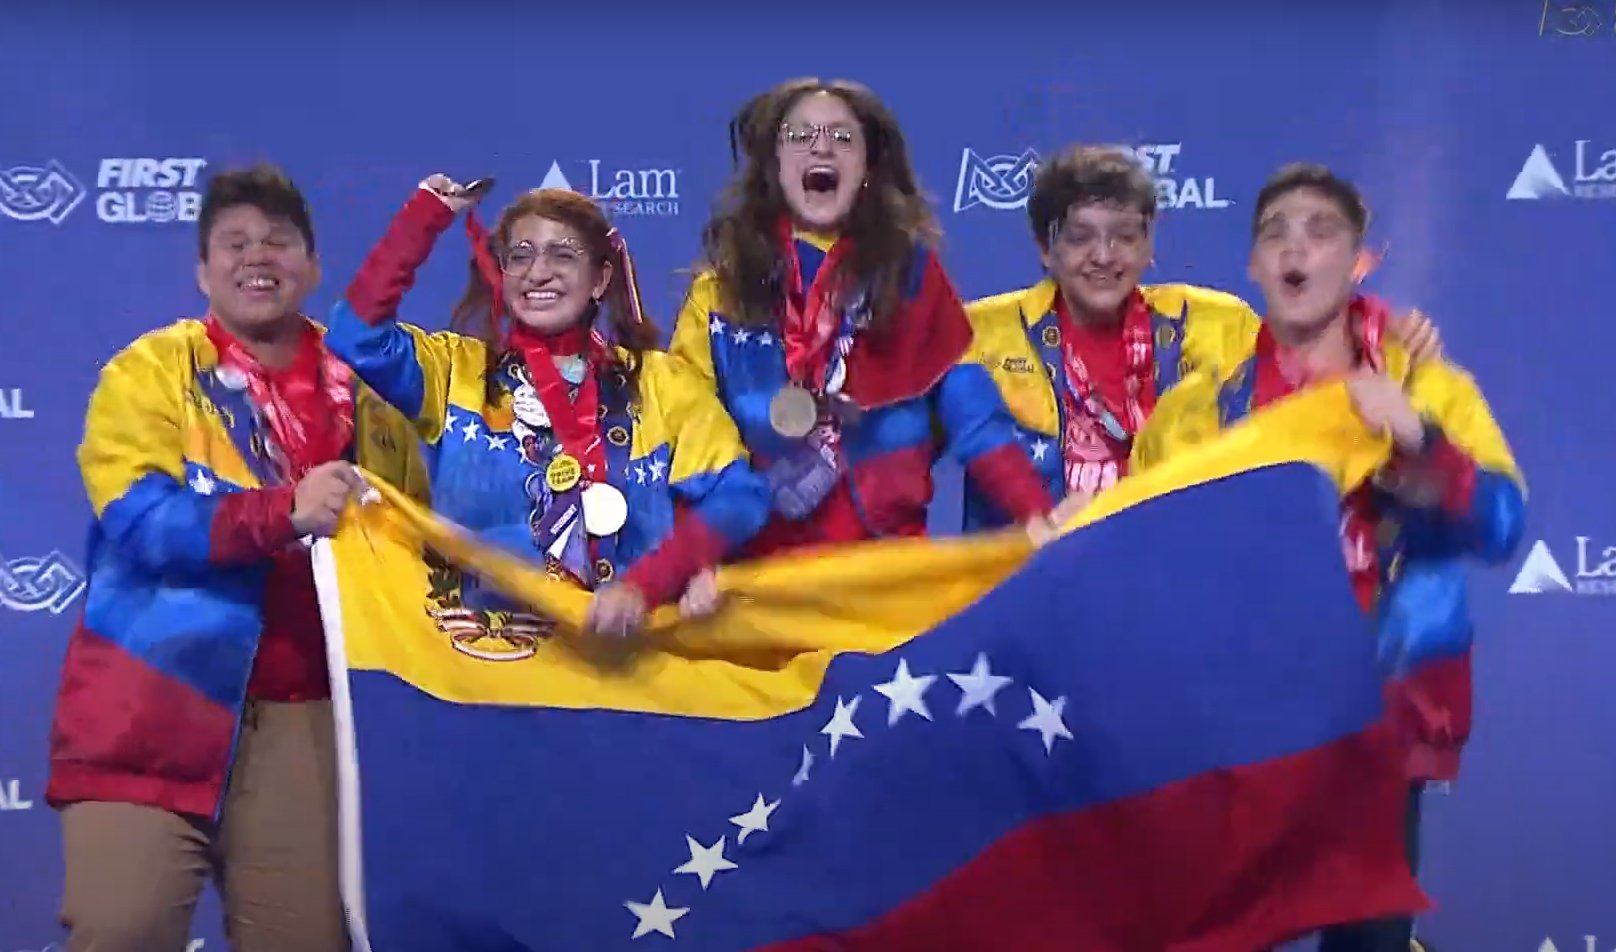 The Venezuelan team celebrating their victory in the FIRST Global Challenge robotics world championship, held in Singapore from October 7 to 10, 2023. Photo: Screenshot by Alba Ciudad.